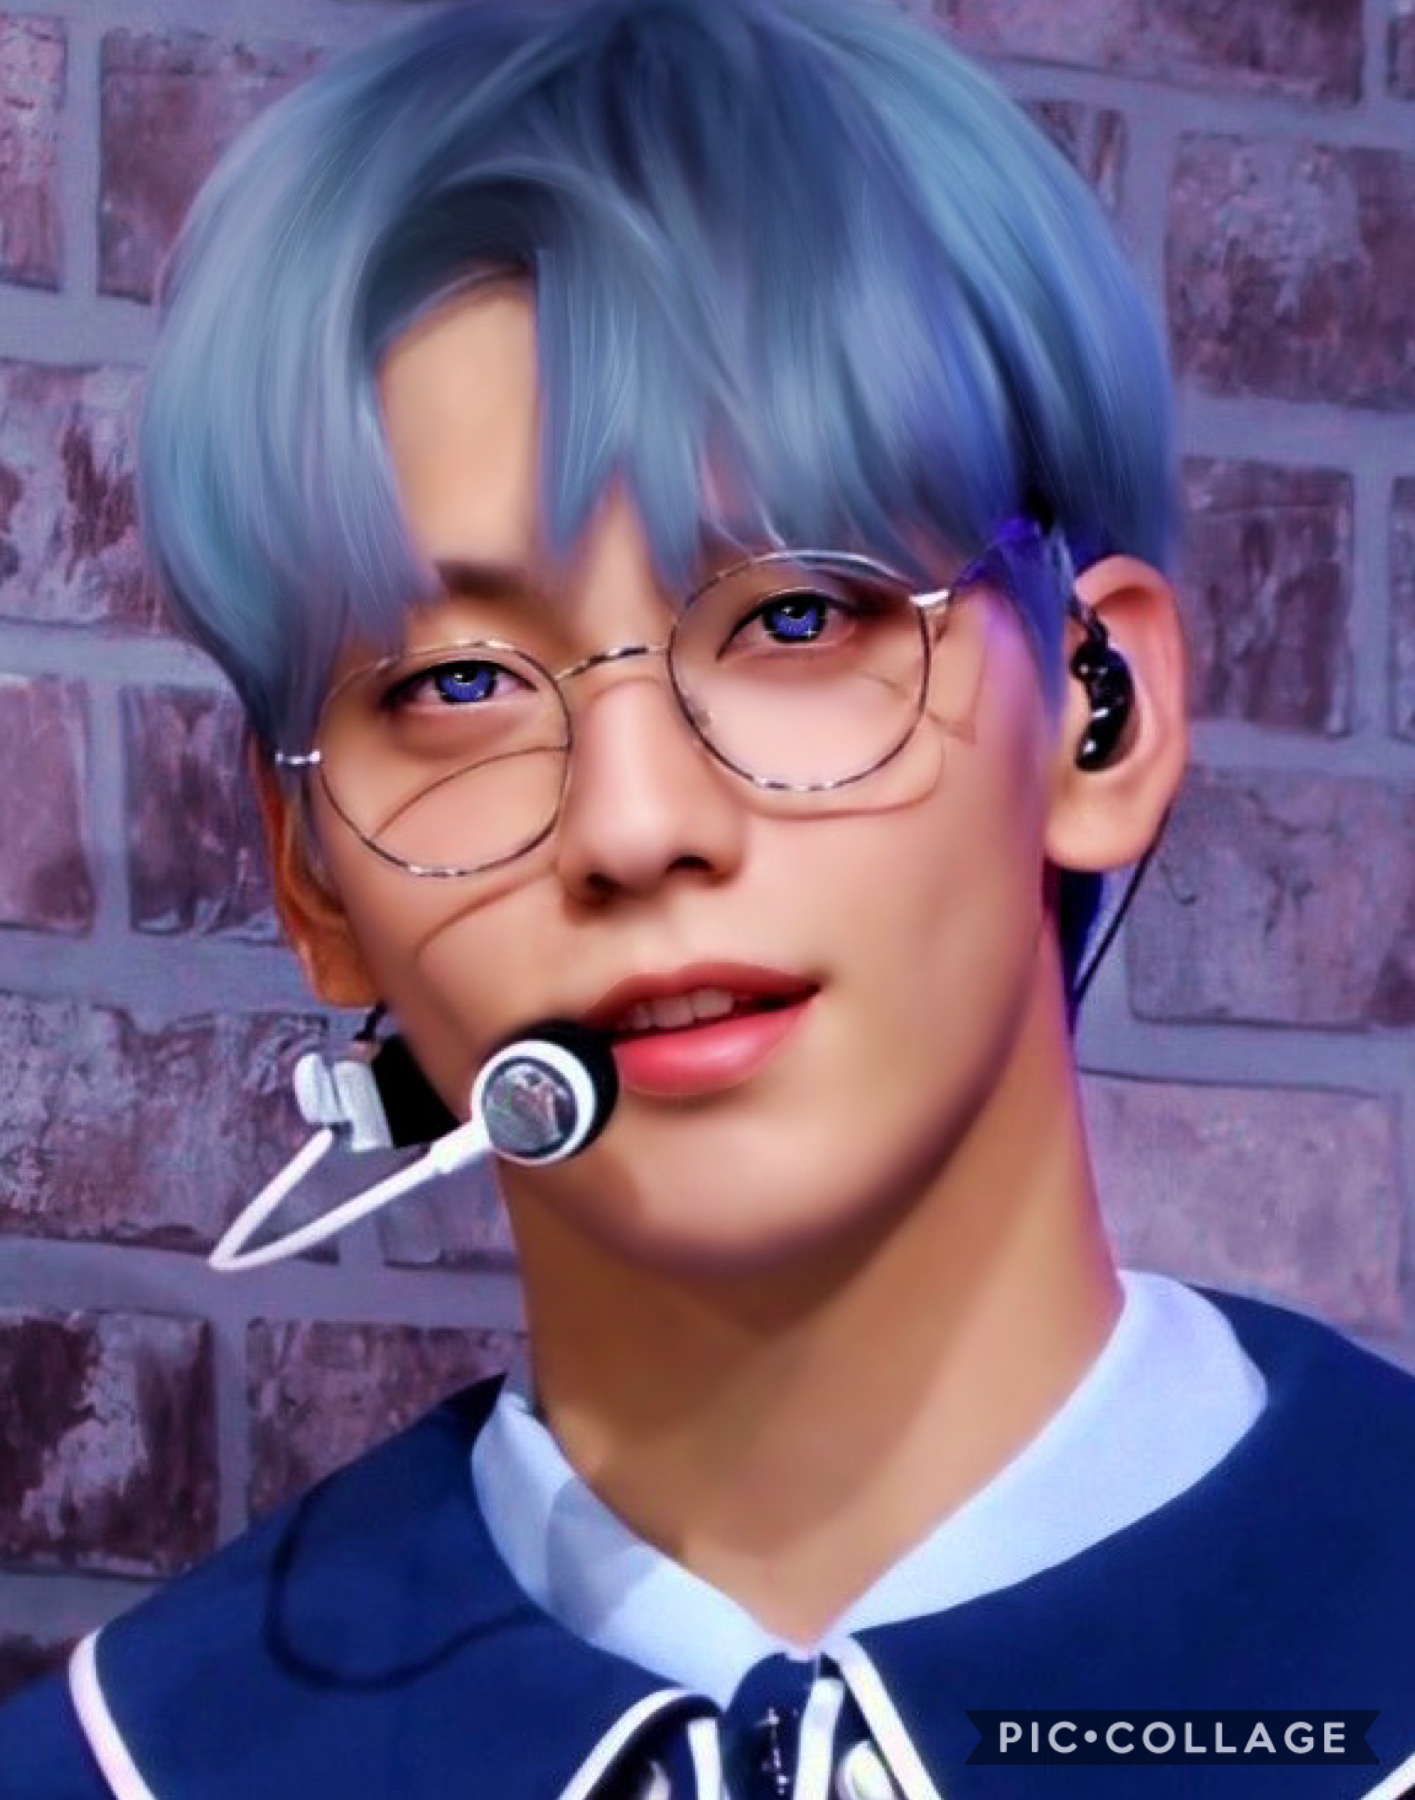 •❄️•
Heyy guys! I’m sorry for the inactivity, I have so many classes and work so it’s really hard to stay active. I’ll definitely try tho!

song of the day: entire ateez comeback because it’s🔥 